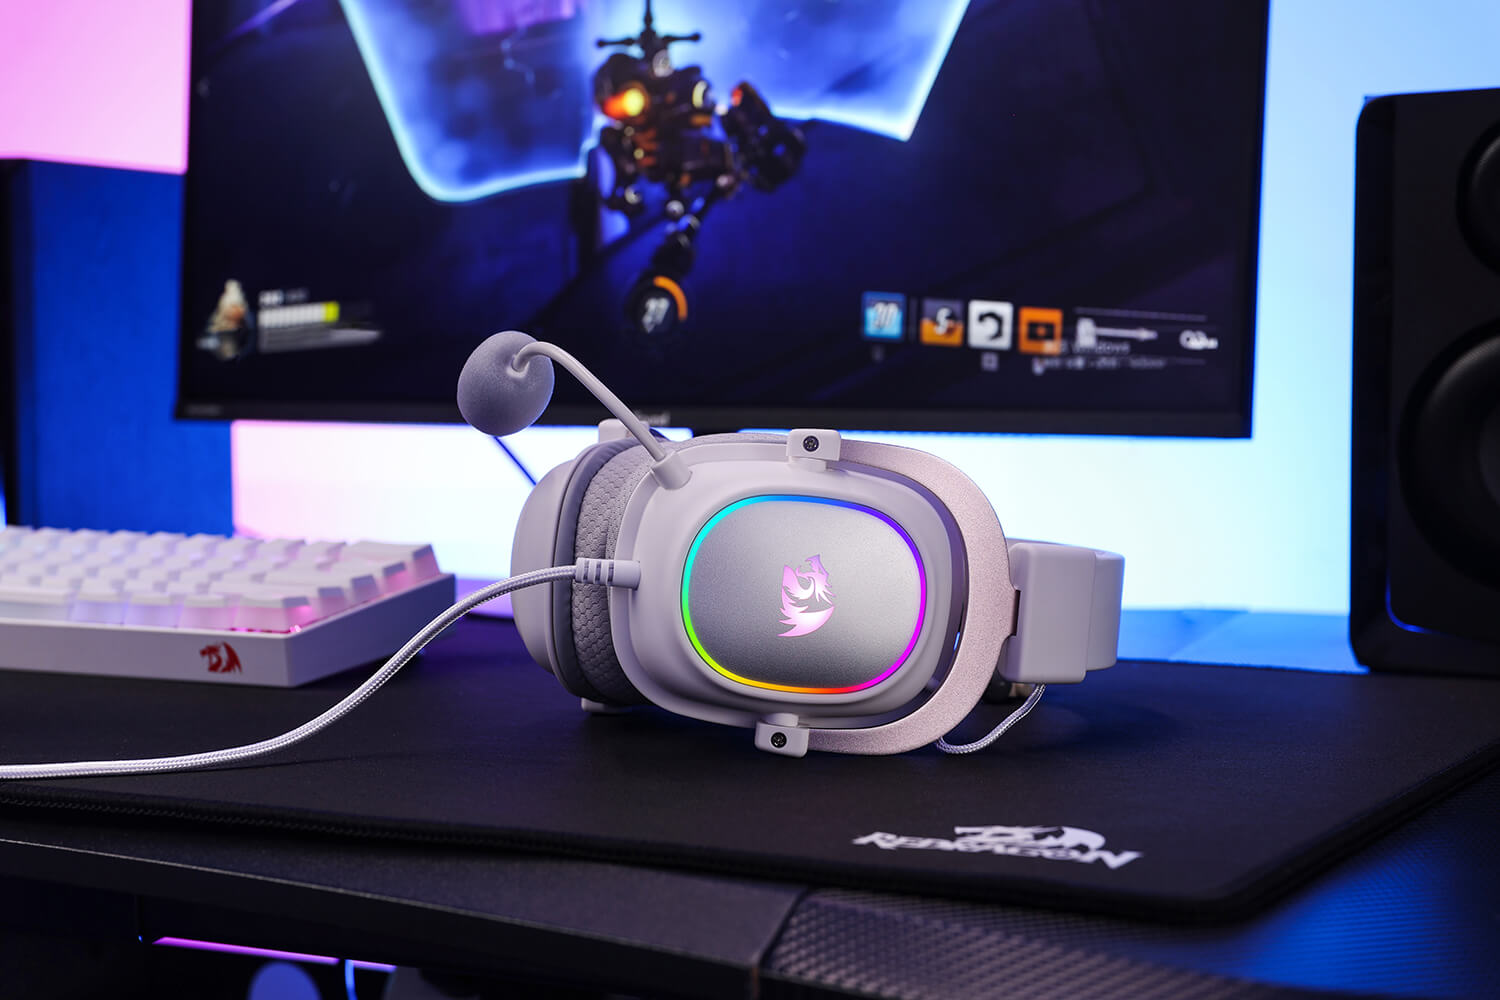 Headphones-Redragon-H510-Zeus-X-RGB-White-Wired-Gaming-Headset-7-1-Surround-Sound-53MM-Audio-Drivers-in-Memory-Foam-Ear-Pads-3